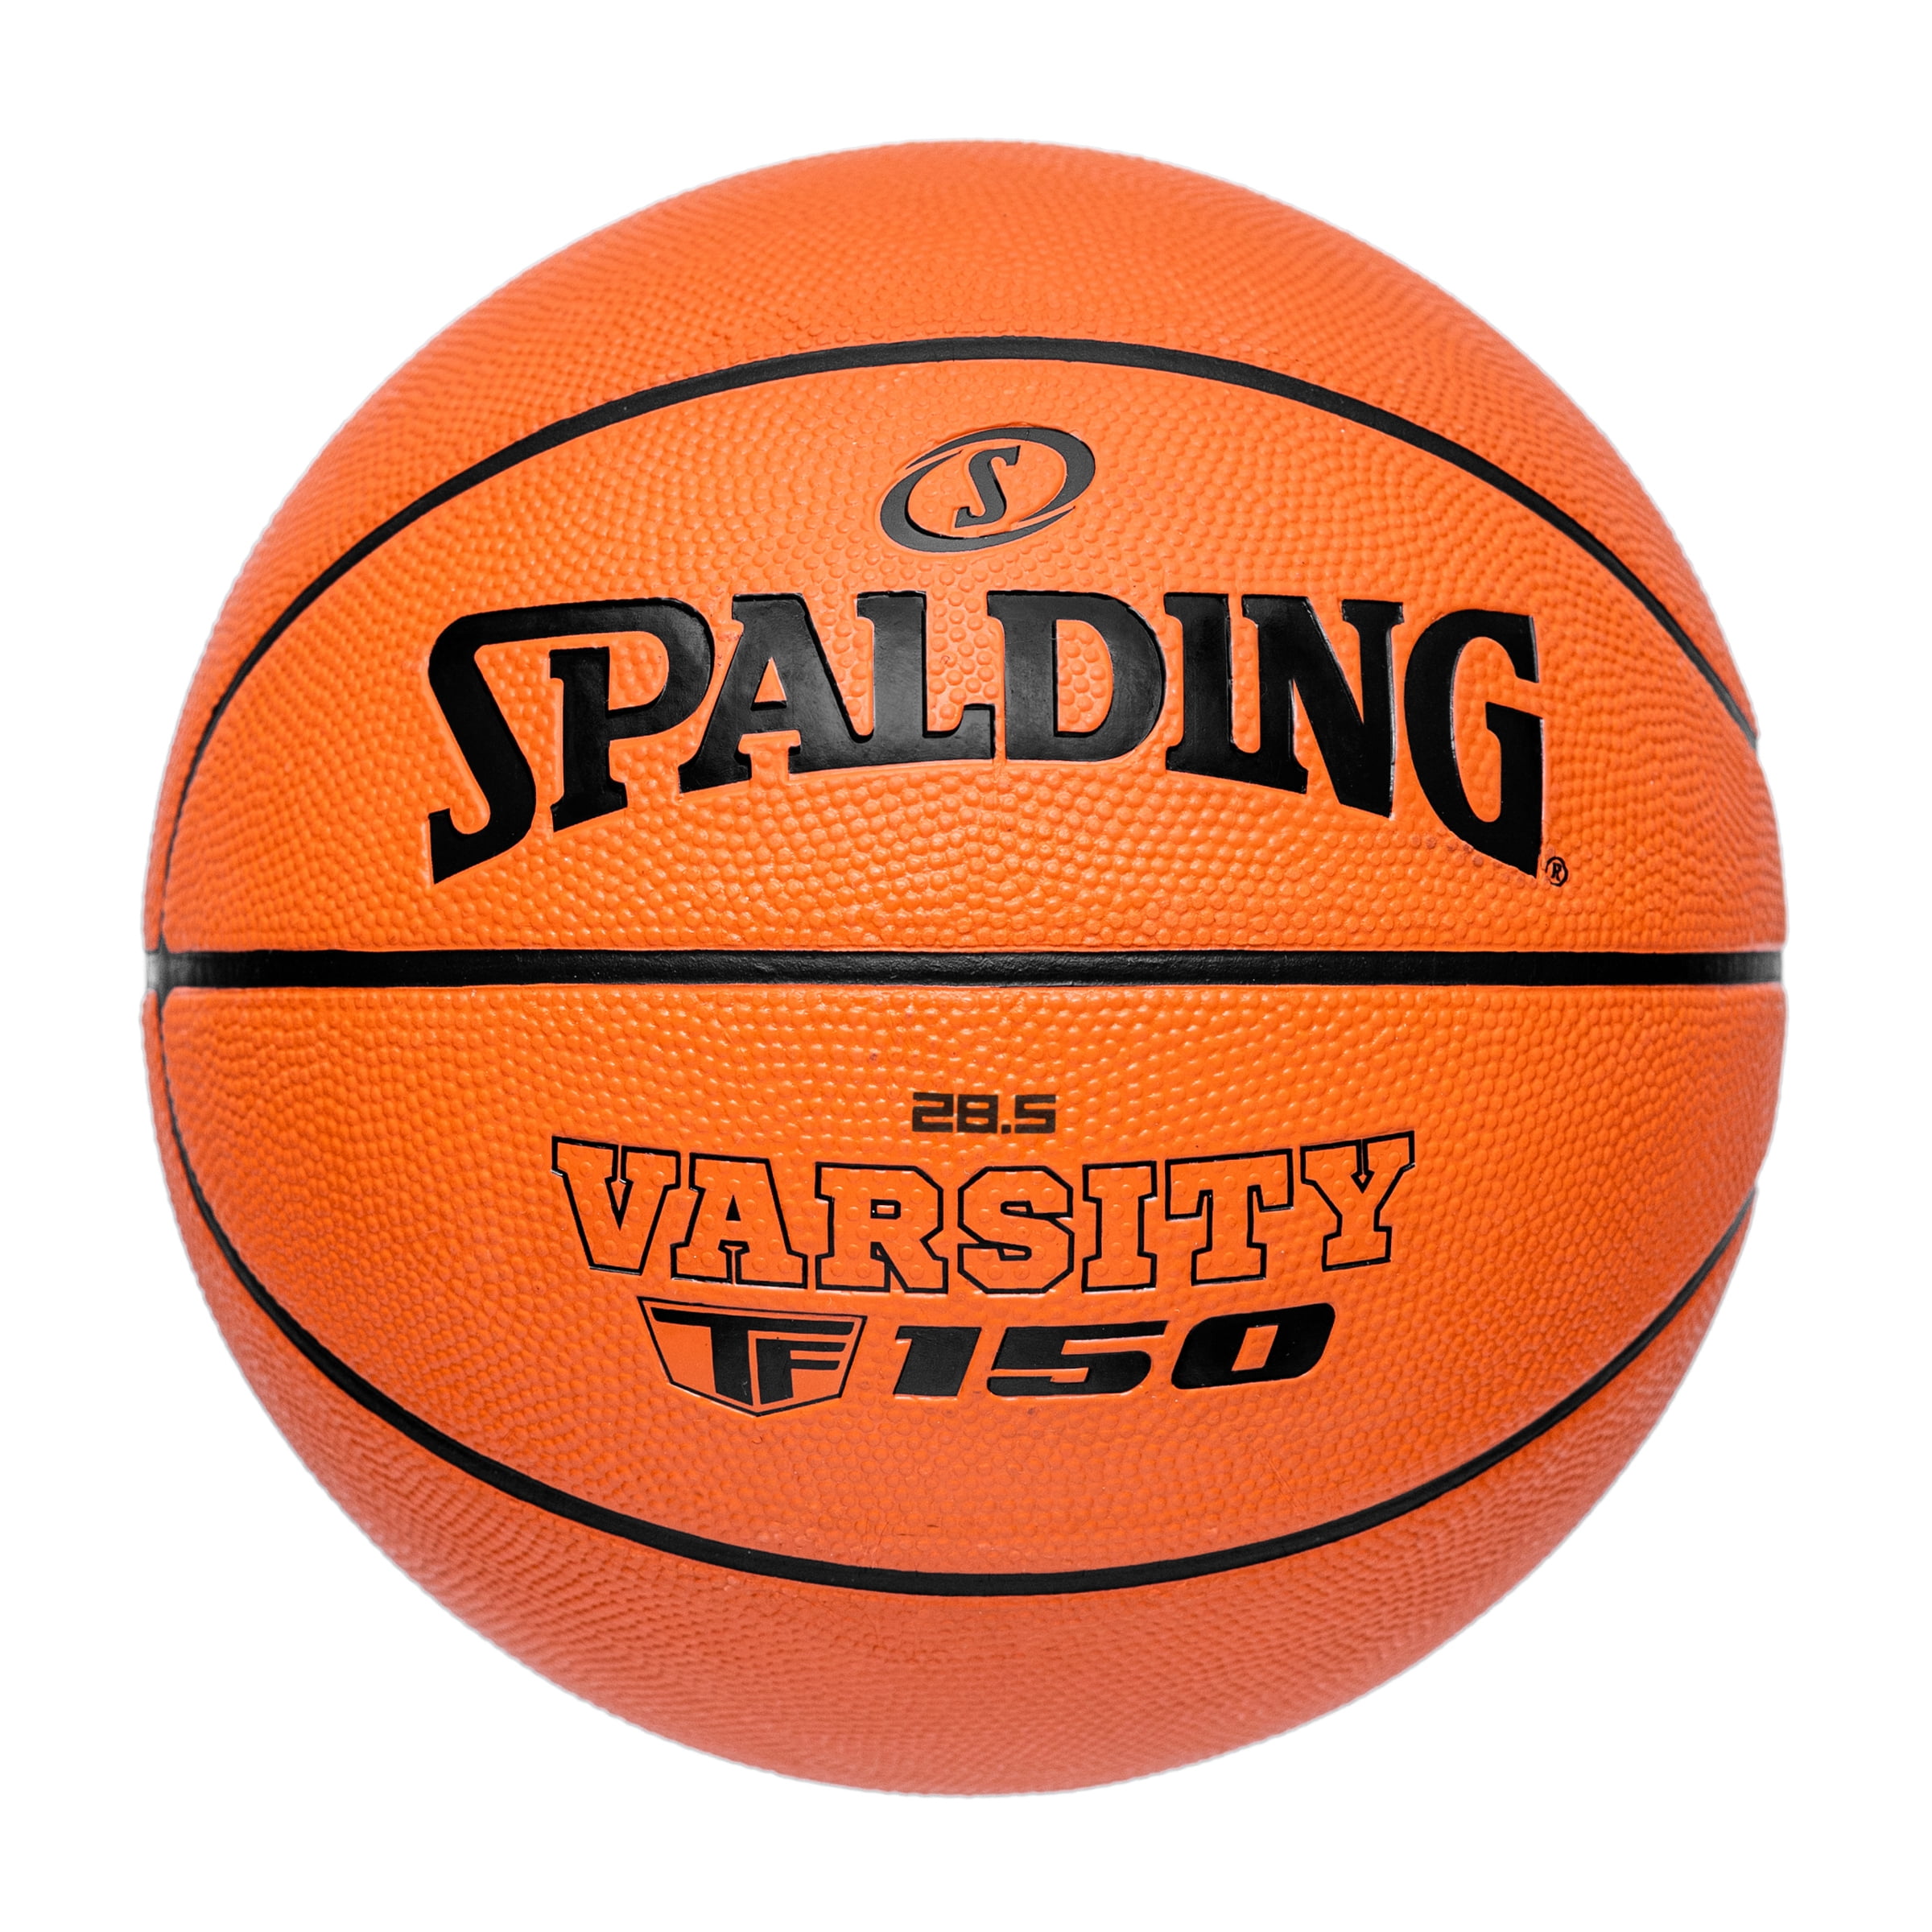 Spalding Multi Color Outdoor Basketball 29.5 Size Cheap Unisex For Best Training 